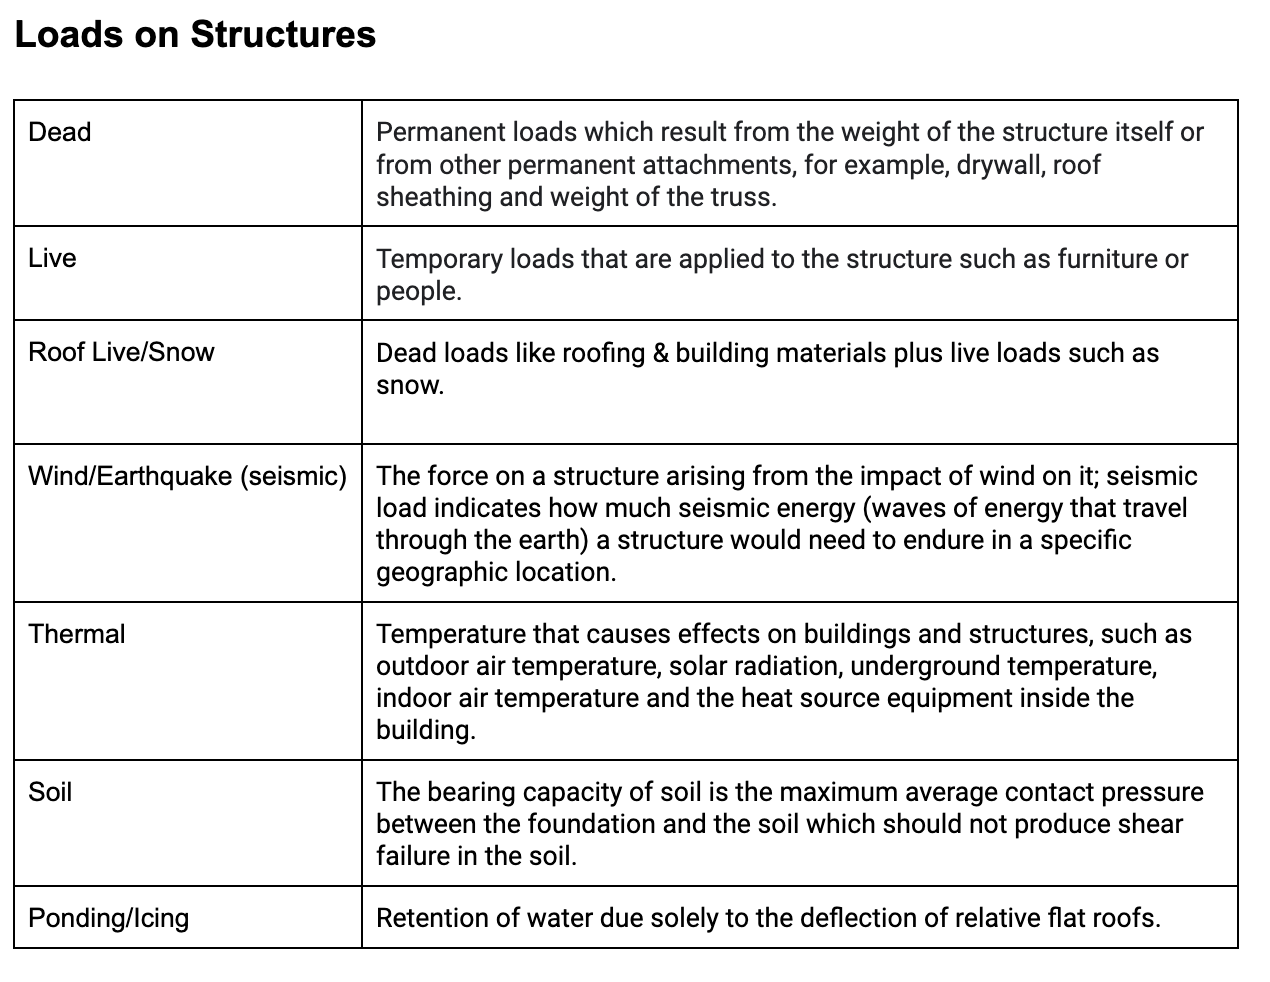 Loads on structures